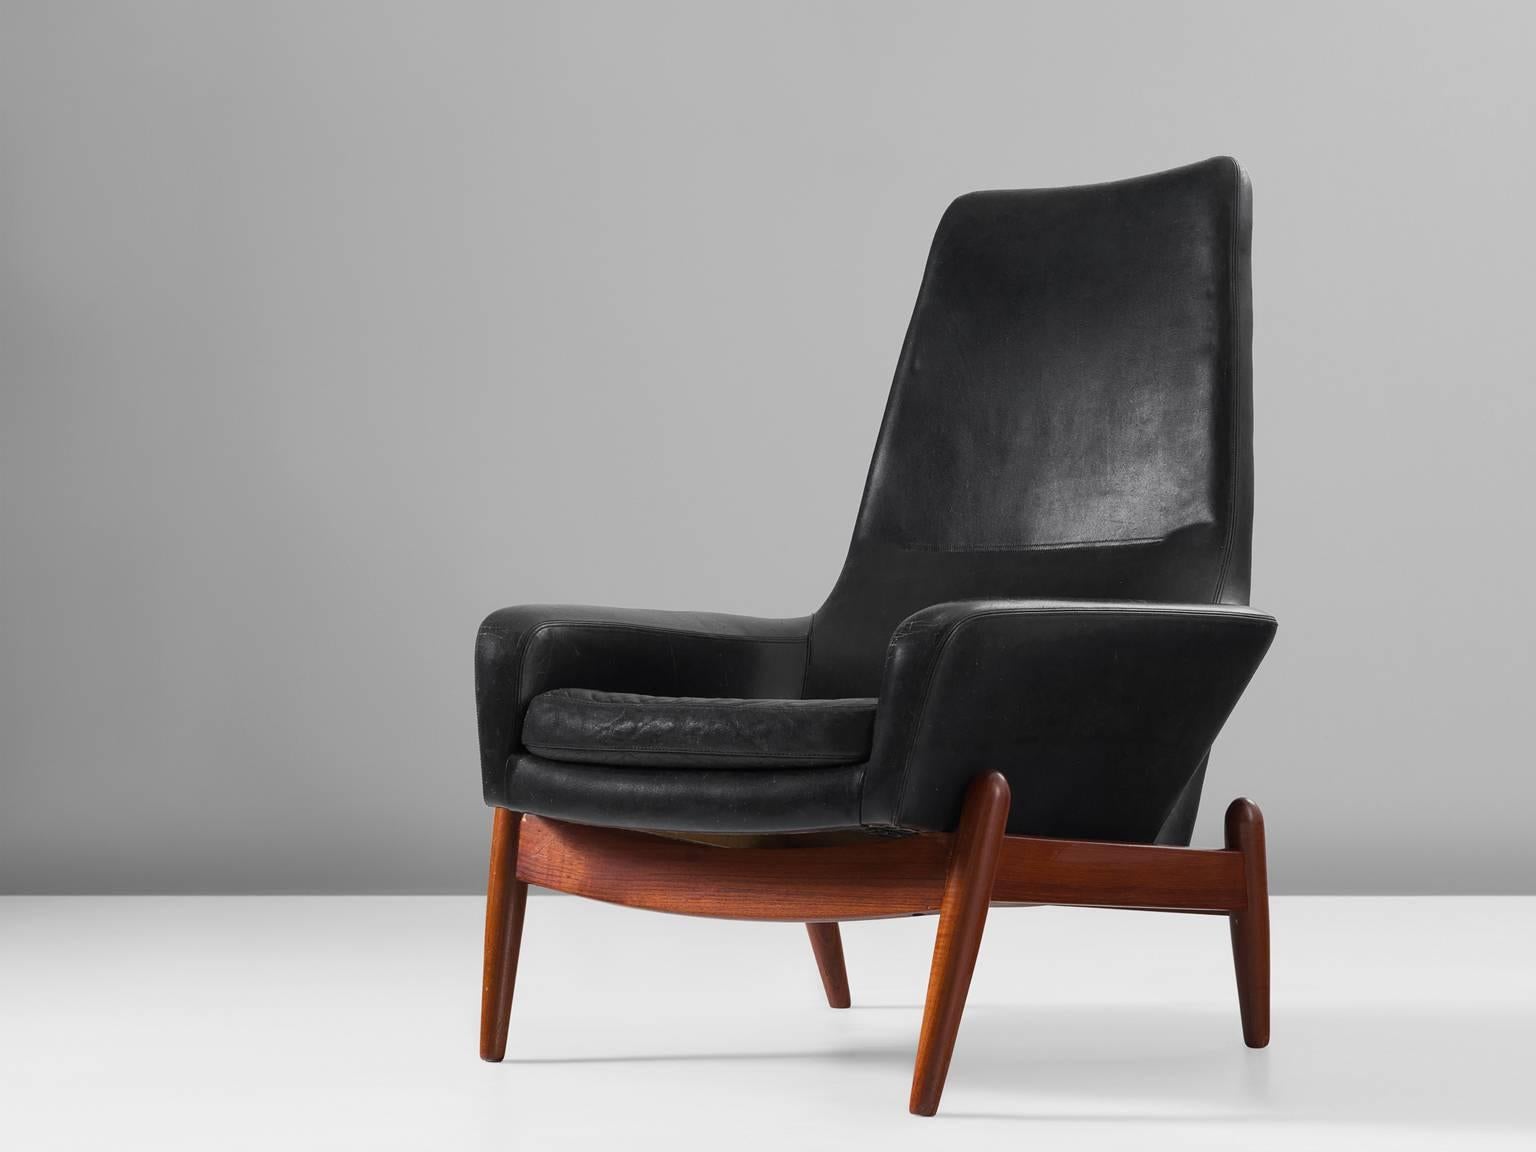 Ib Kofod-Larsen, PD30 chair in black leather and teak for Povl Dinesen, Denmark, 1960s.

The designer of this chair, Ib Kofod-Larsen (1921-2003) is known for his distinctive designs features and comfortable materials and simplistic lines, with